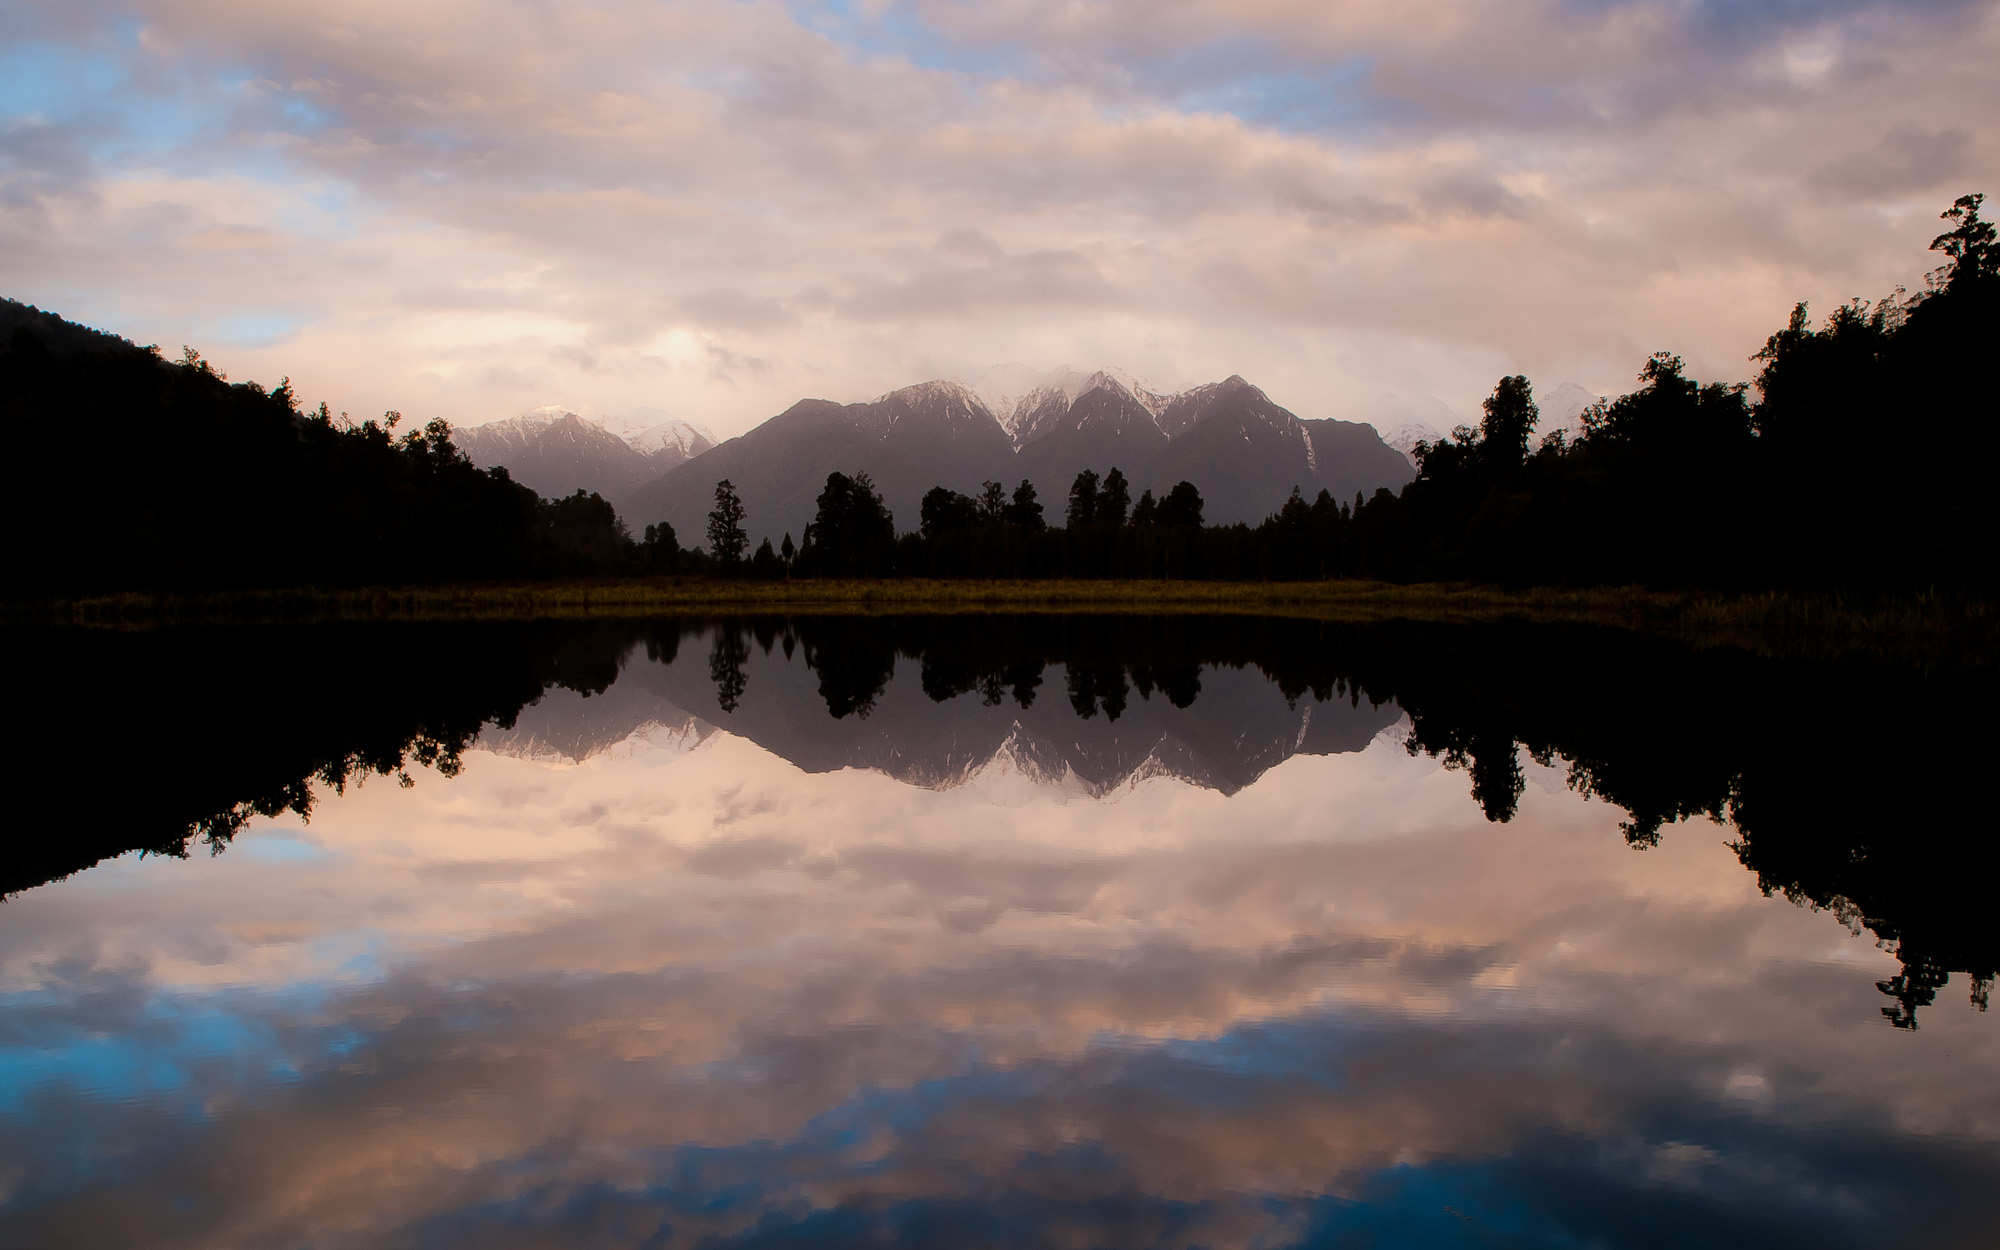 Lake Matheson (New Zealand) just after the sunset